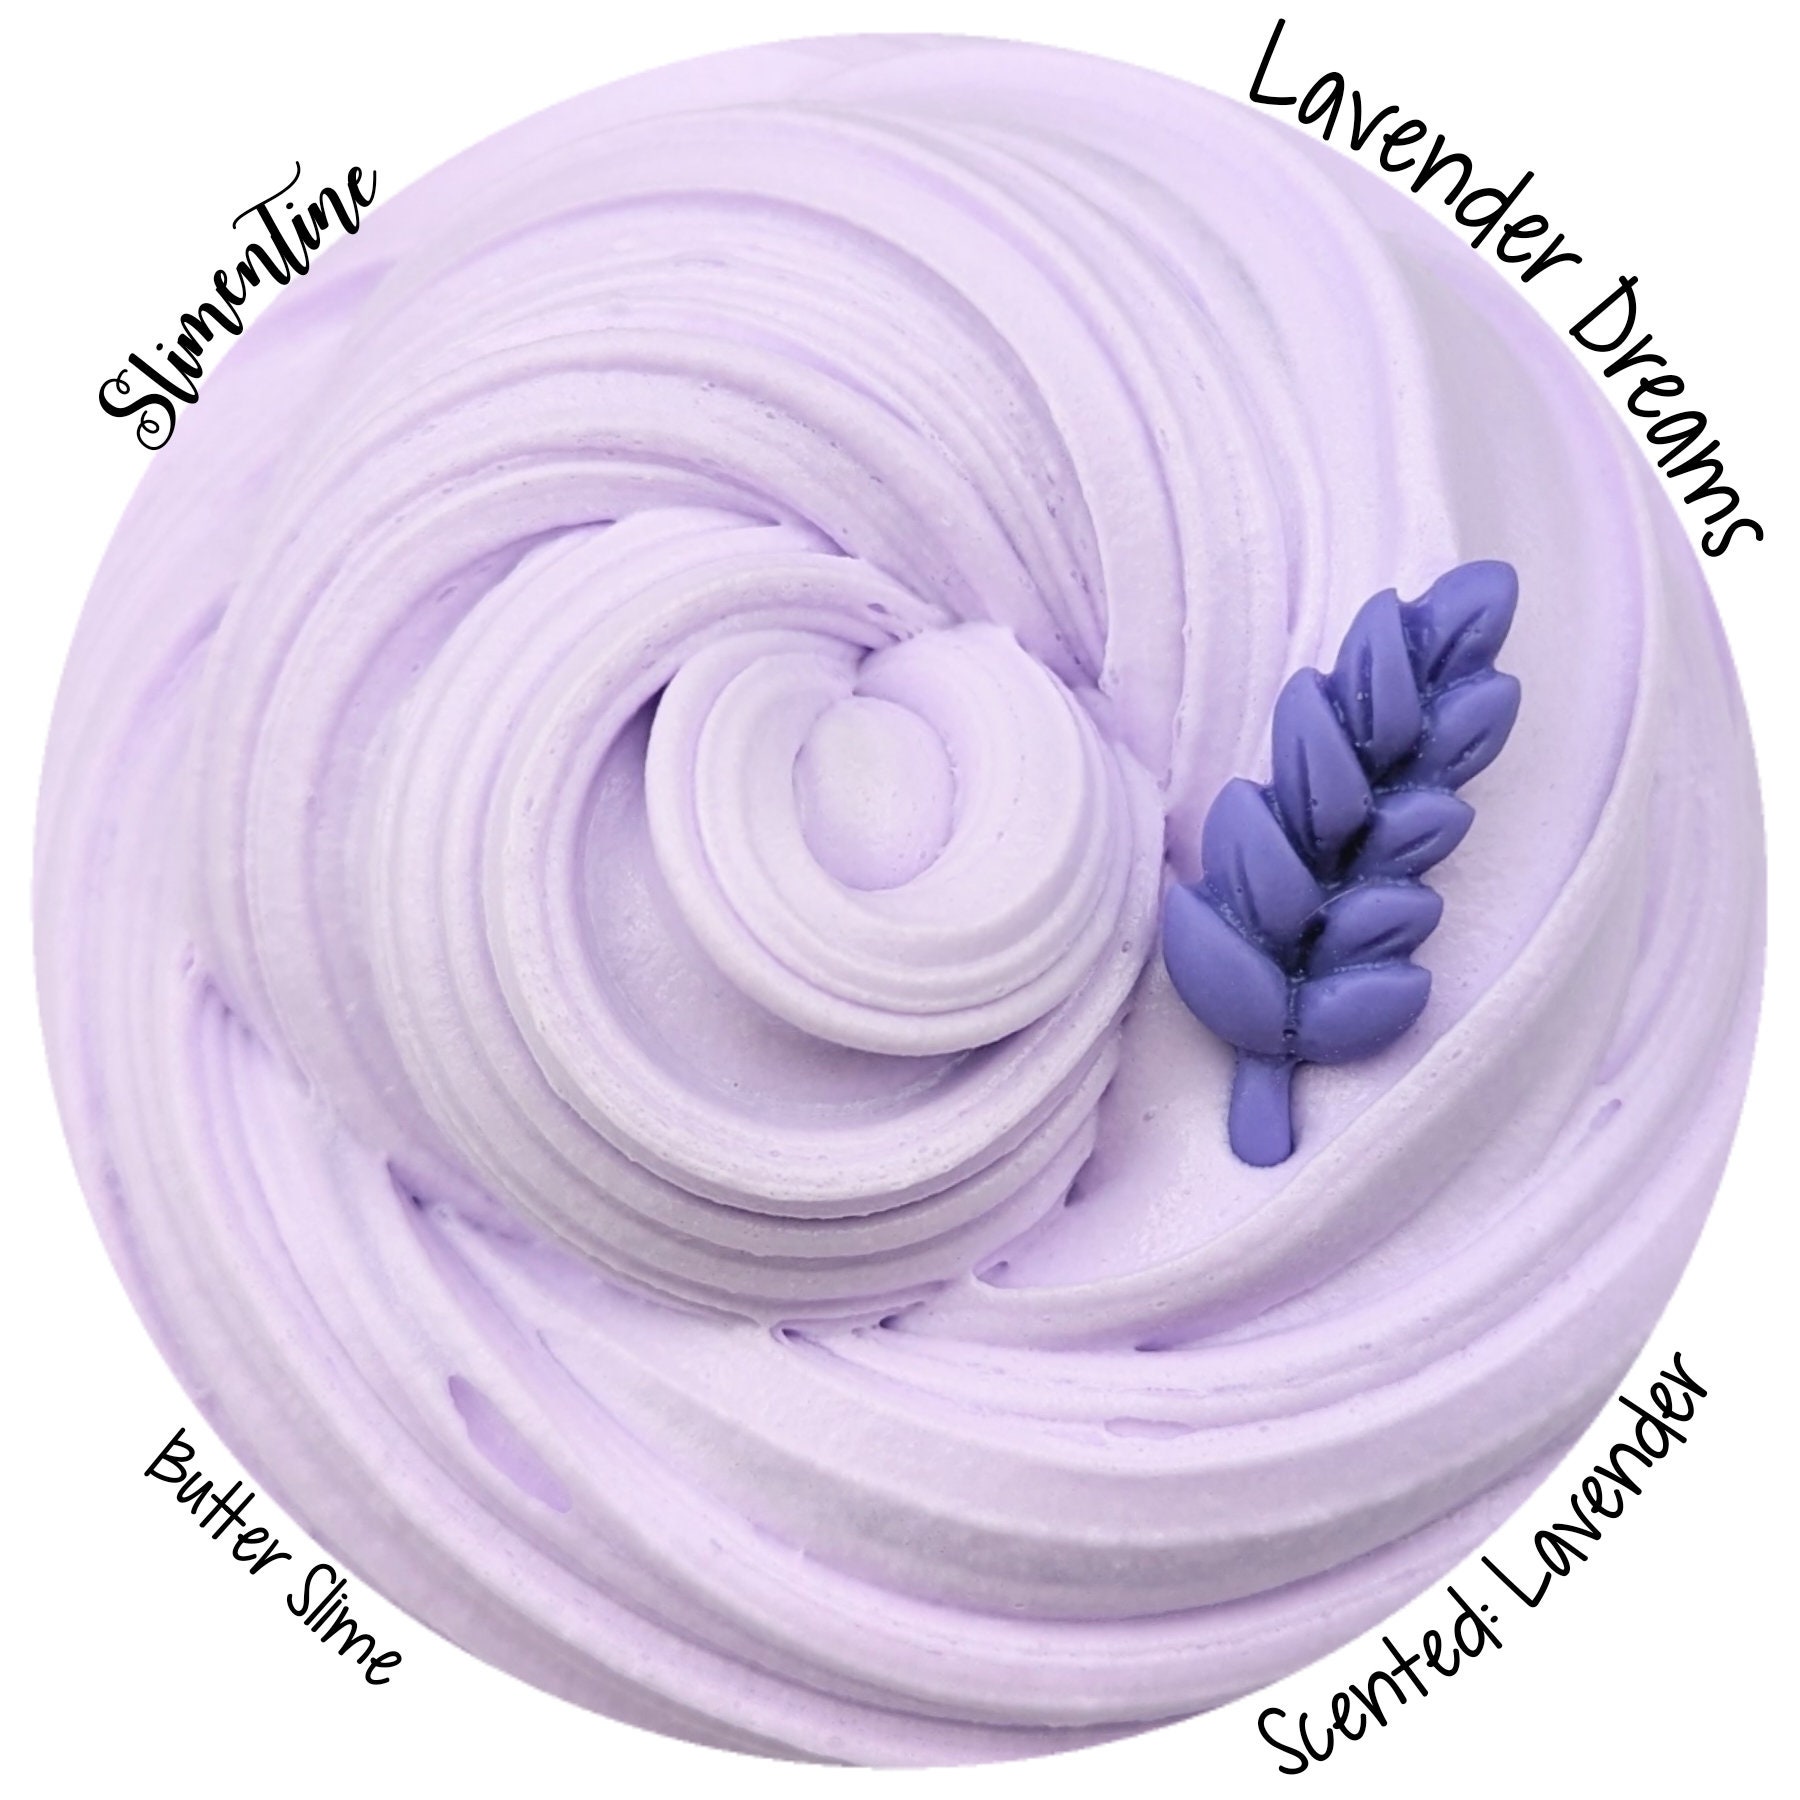 Aromatherapy Bye Bye Anxiety  Pastel Blue Butter Slime – Slime